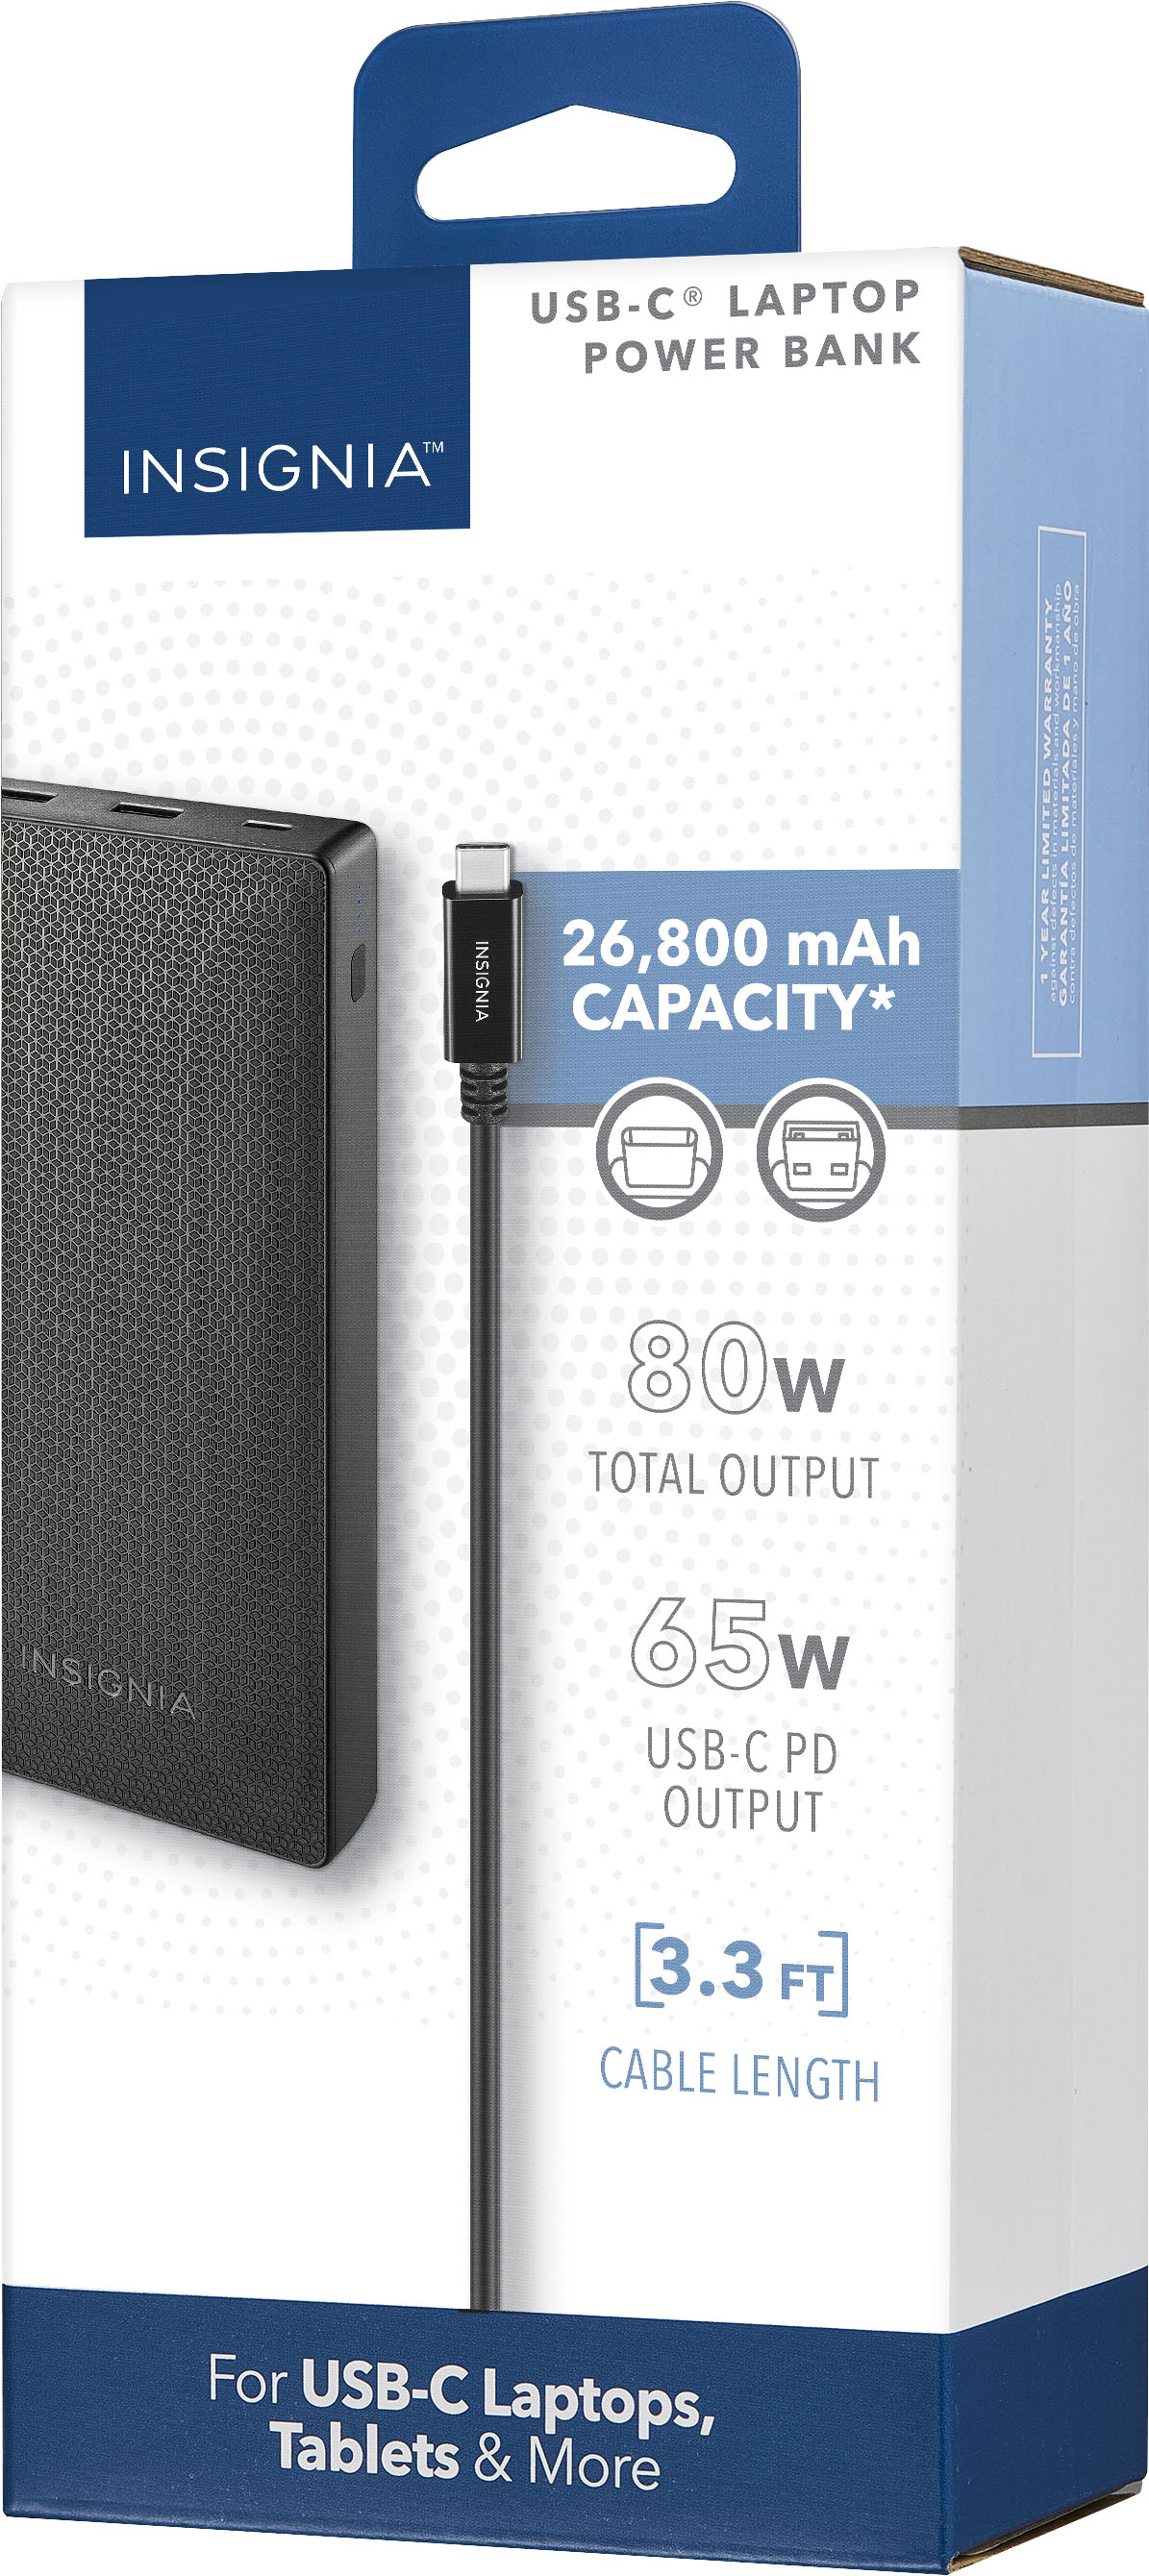 Insignia™ - 80 W 26,800 mAh Portable Charger for Most USB-C Laptops - BlackInsignia 26,800mAh USB-C Portable Charger w/ 65W Power Delivery $28.99